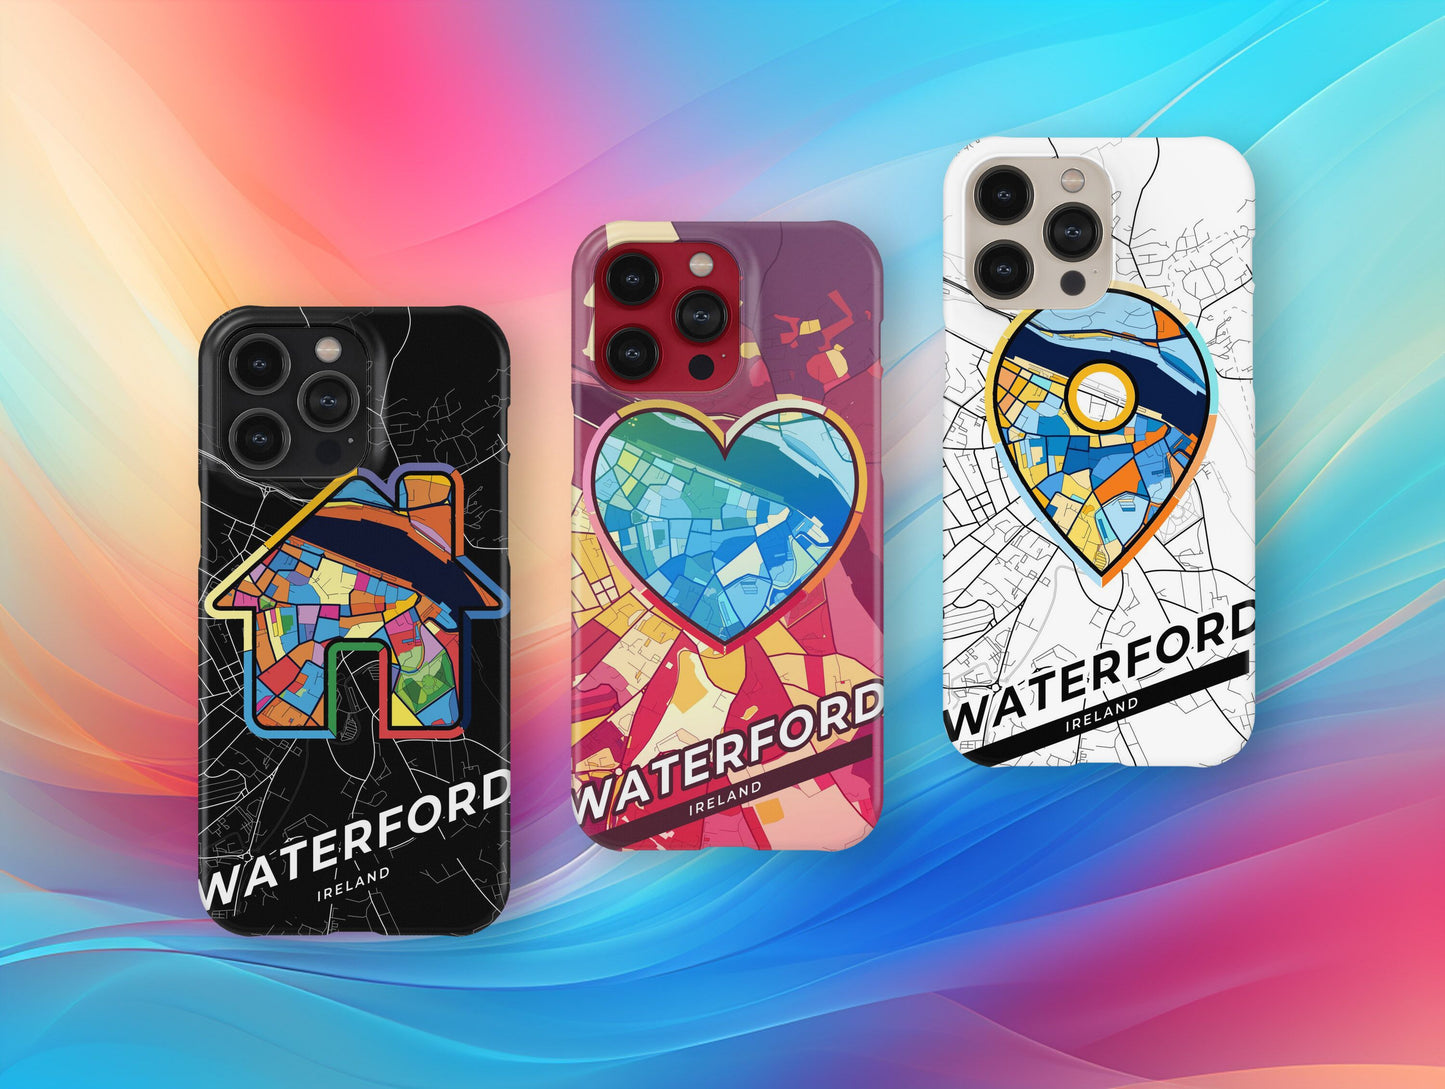 Waterford Ireland slim phone case with colorful icon